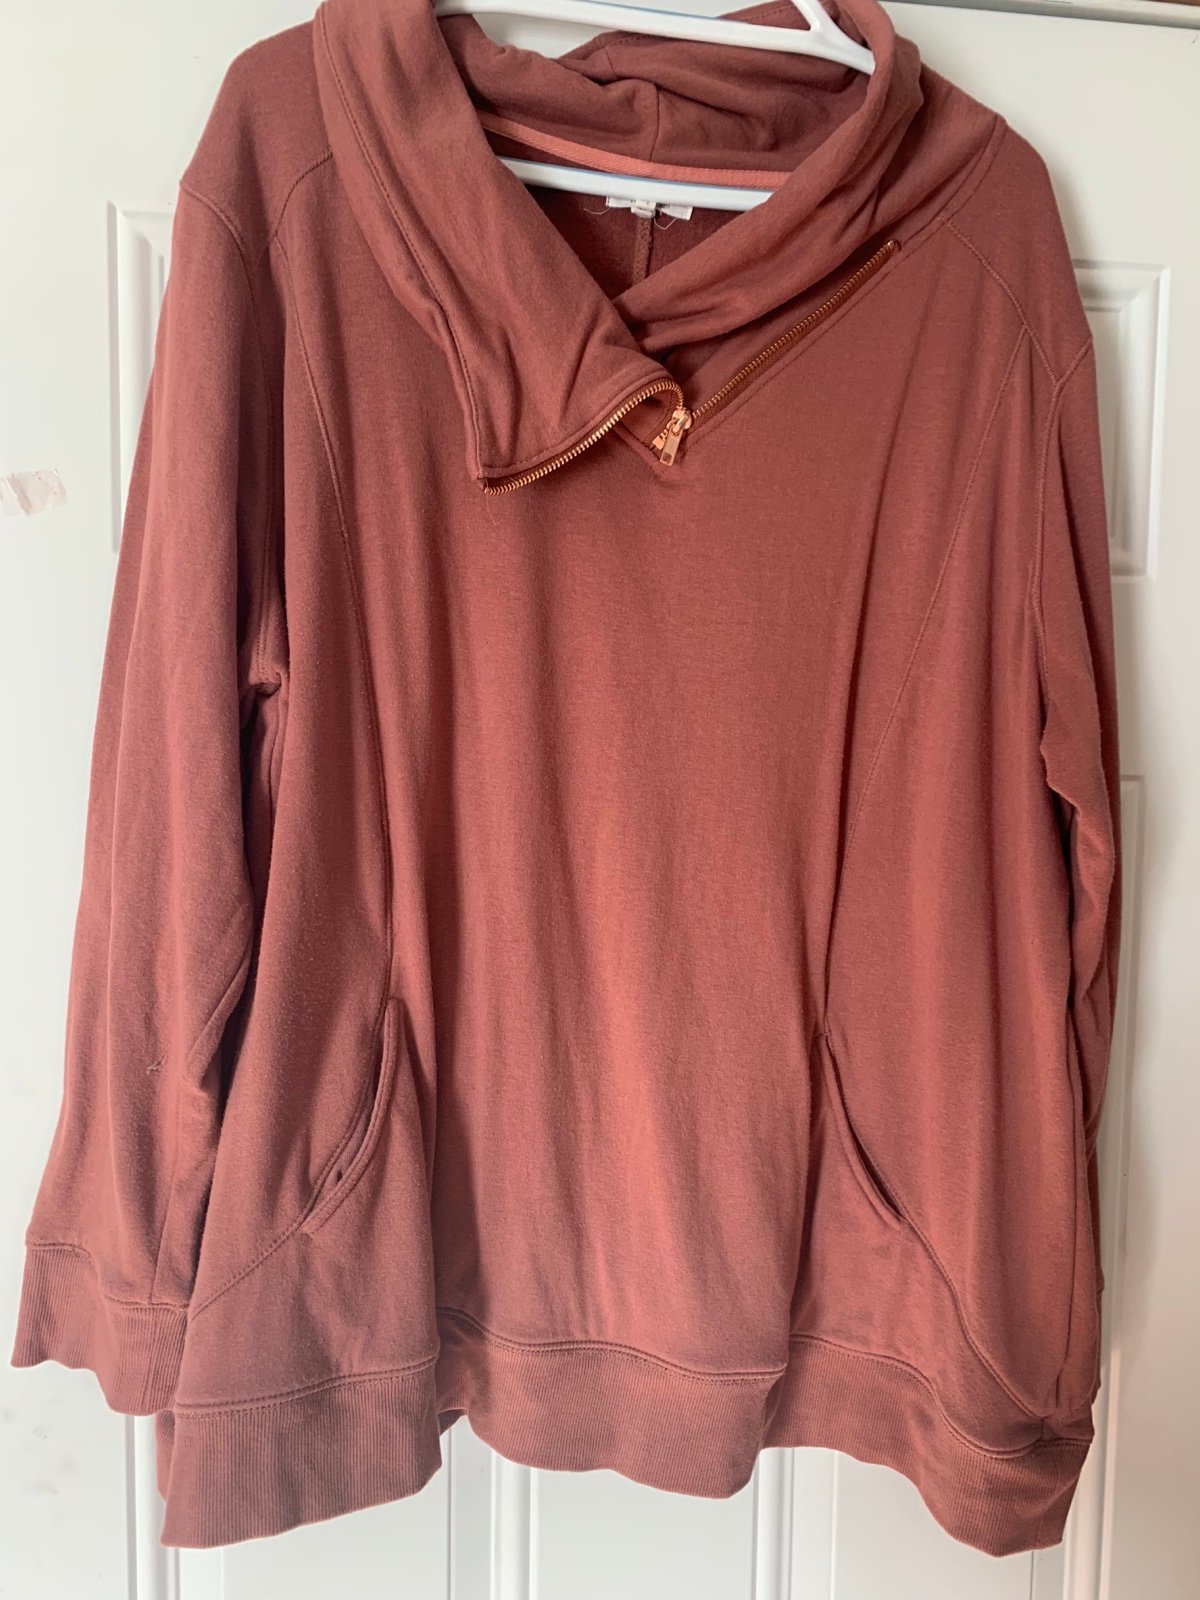 Gorgeous Maurices sweater KRa62LQnw Discount